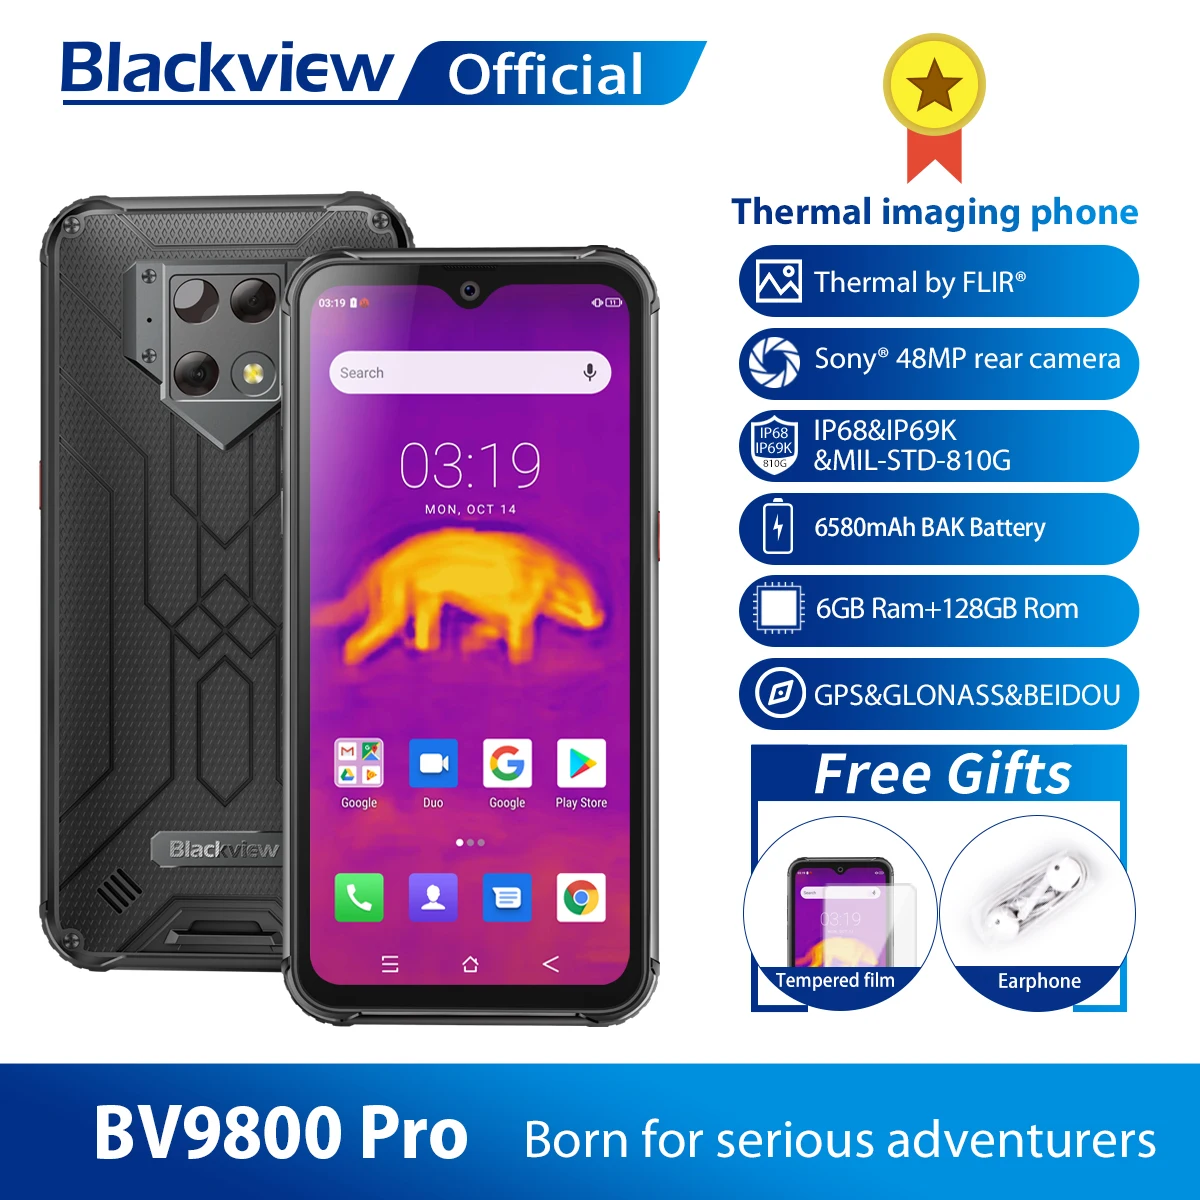 

NEW NEW2022 Blackview BV9800 Pro Global First Thermal imaging Smartphone Helio P70 Android 9.0 6GB+128GB Waterproof 6580mAh